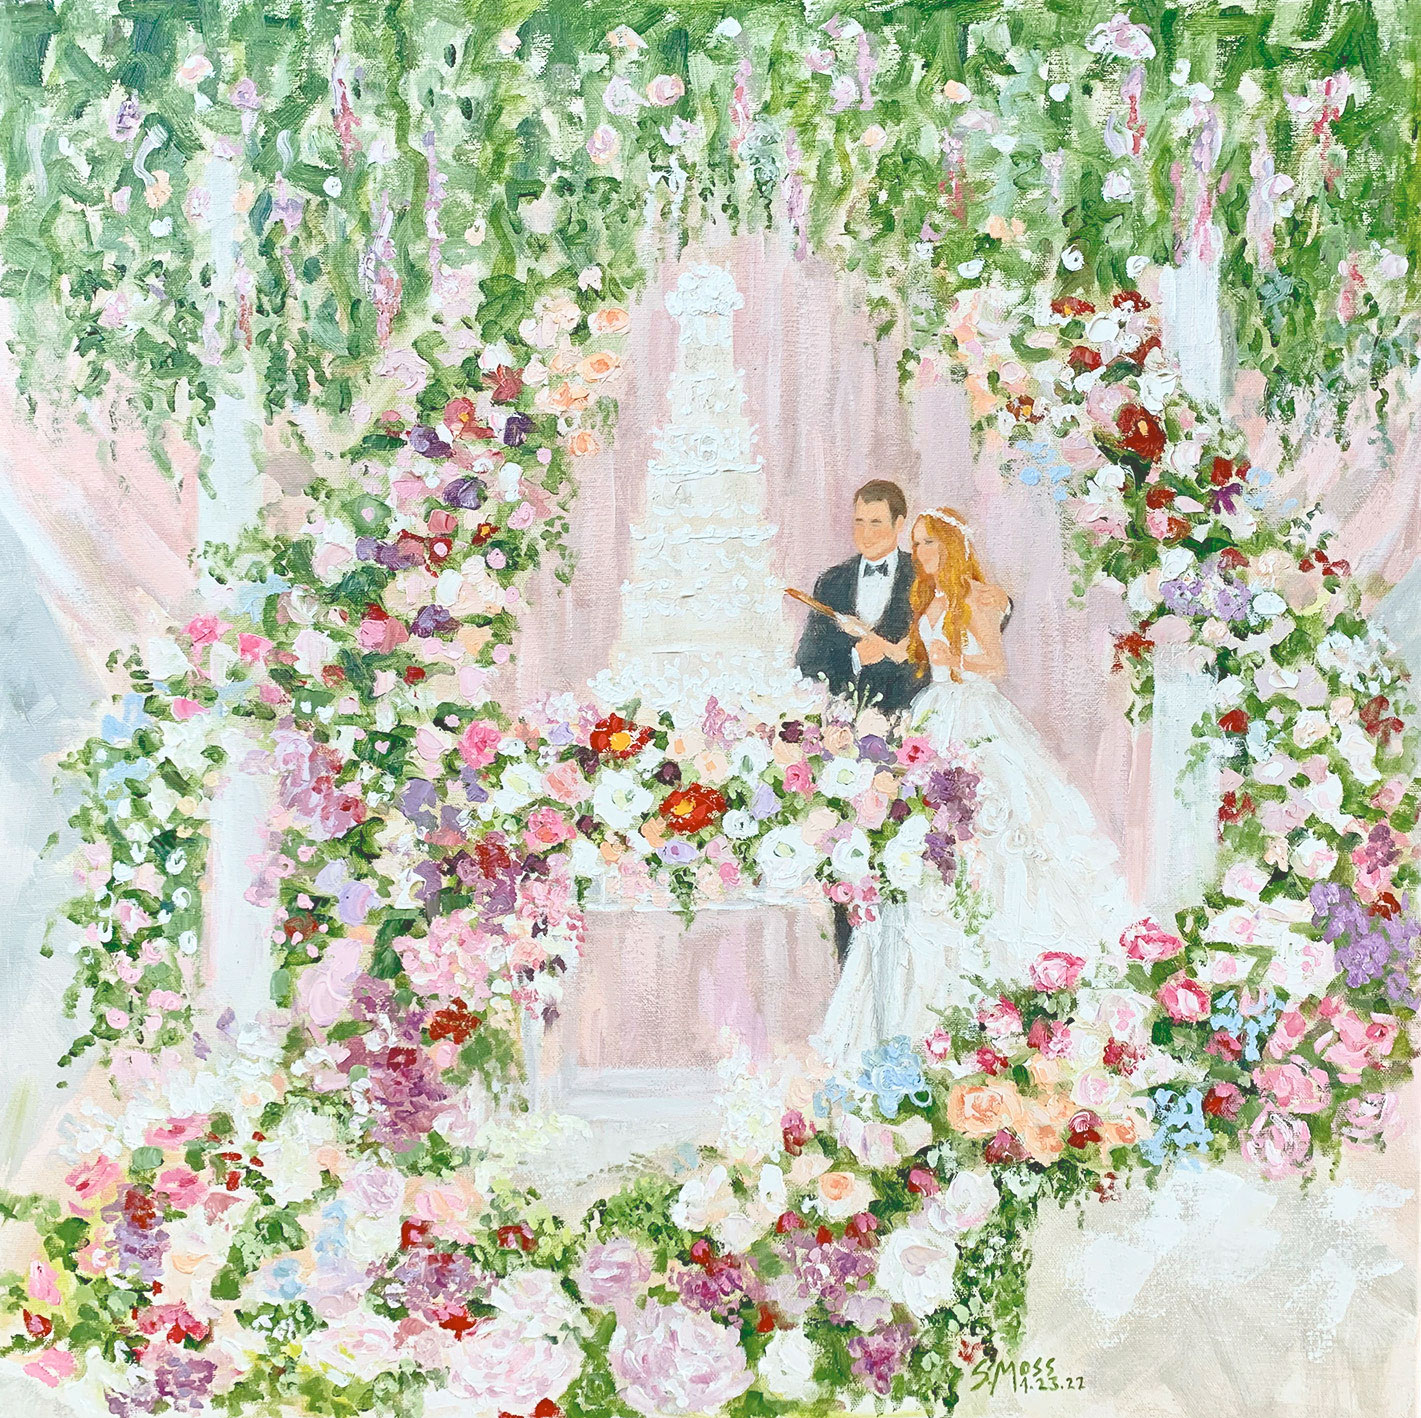 Live oil painting of Ciara Cooley cutting the cake at her wedding, Dallas Texas by Susan Moss Cooper